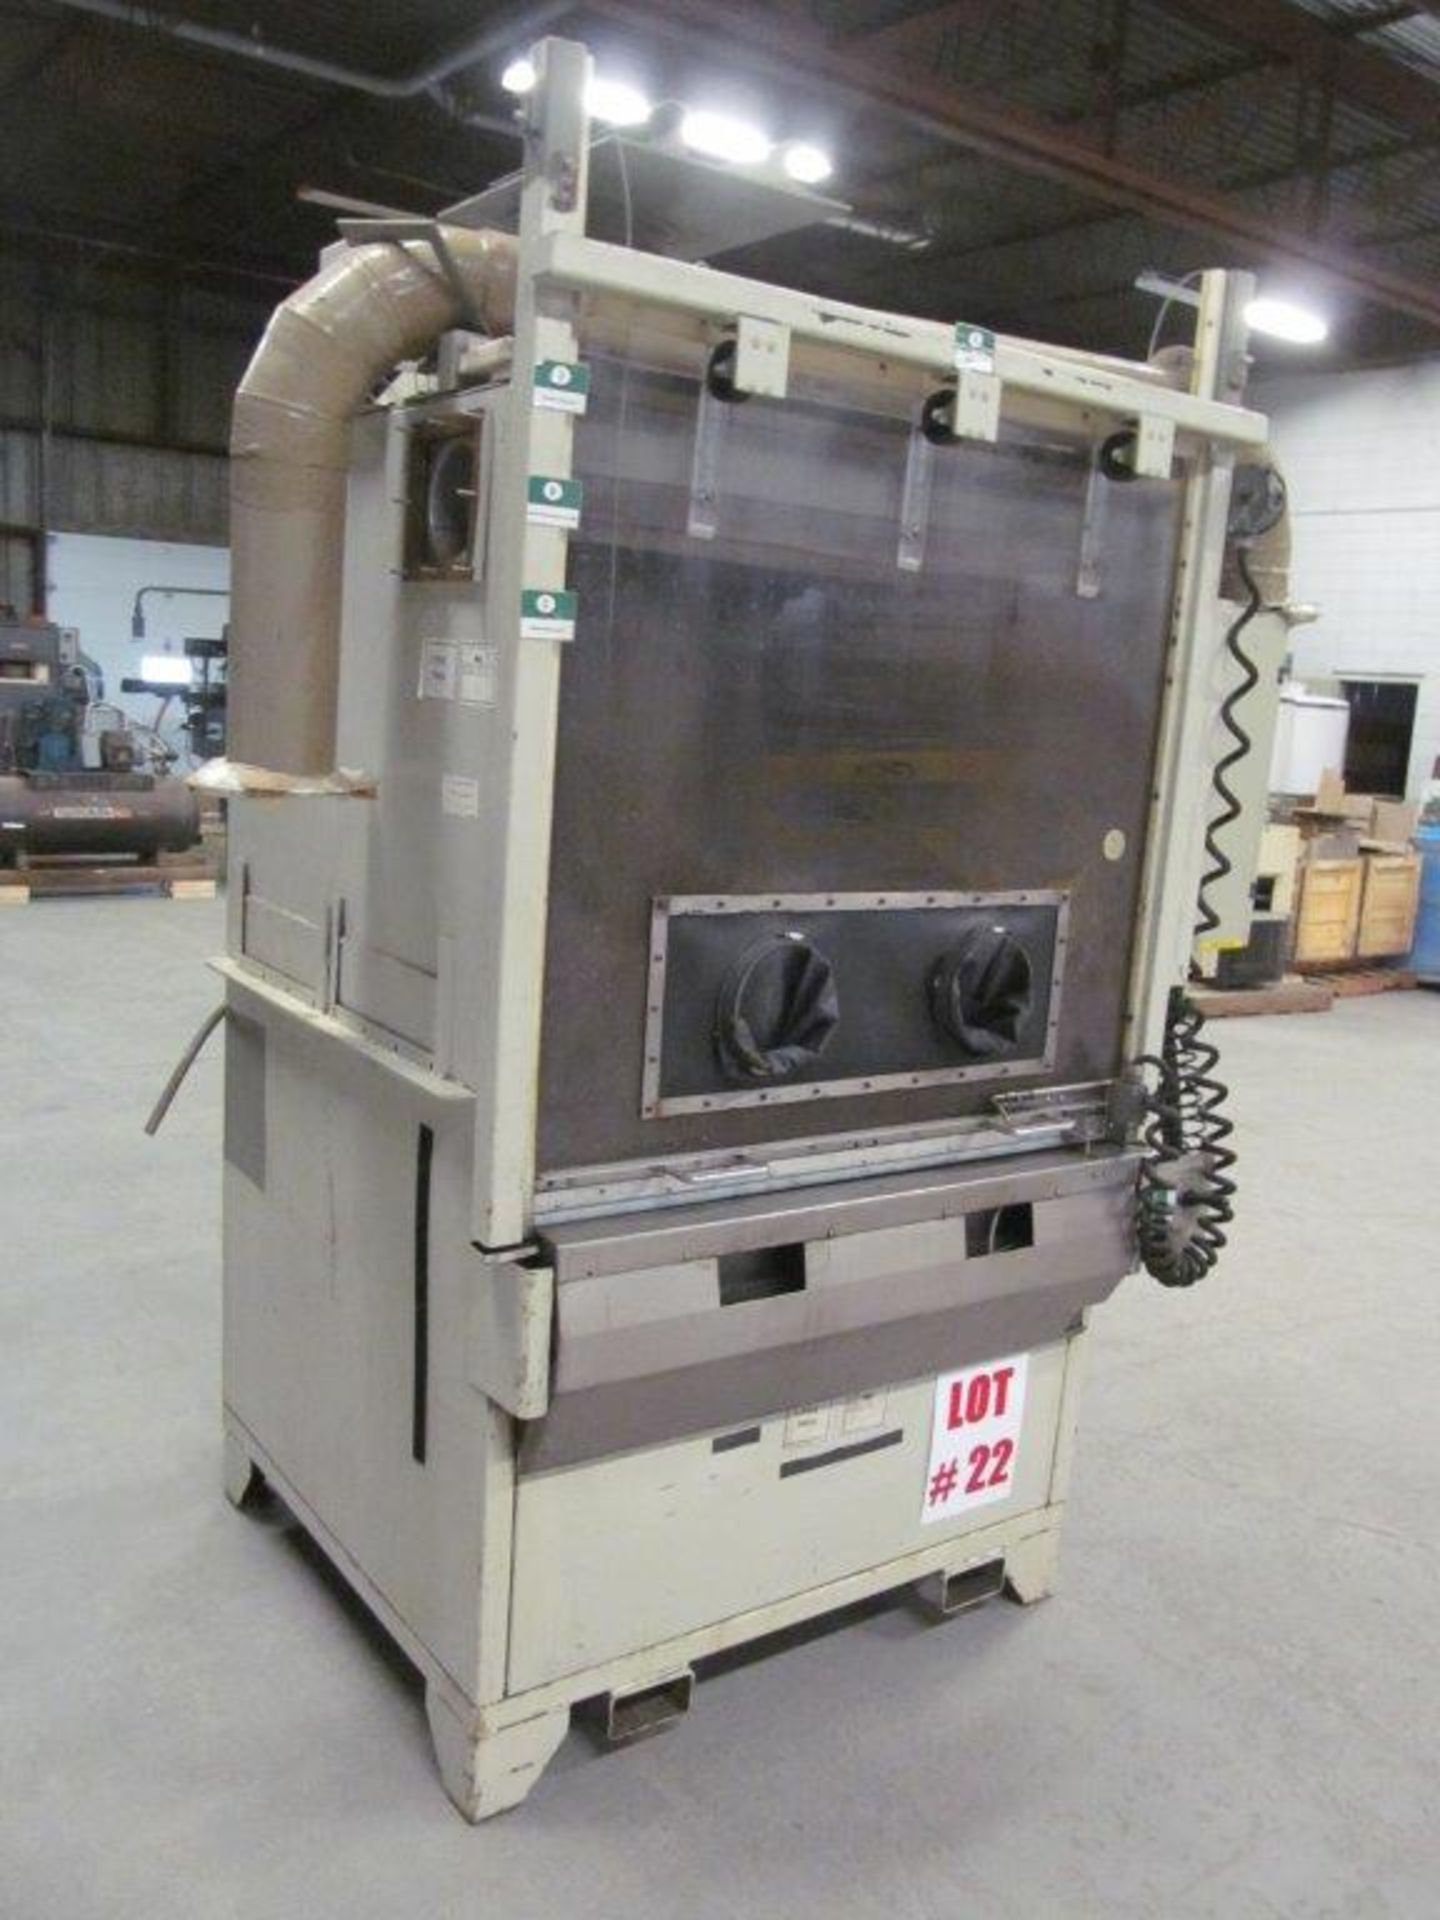 CLEANING SPRAY BOOTH MODEL MC98-062, ELECTRICS: 575V / 3PH / 60C, CONDITION UNKNOWN